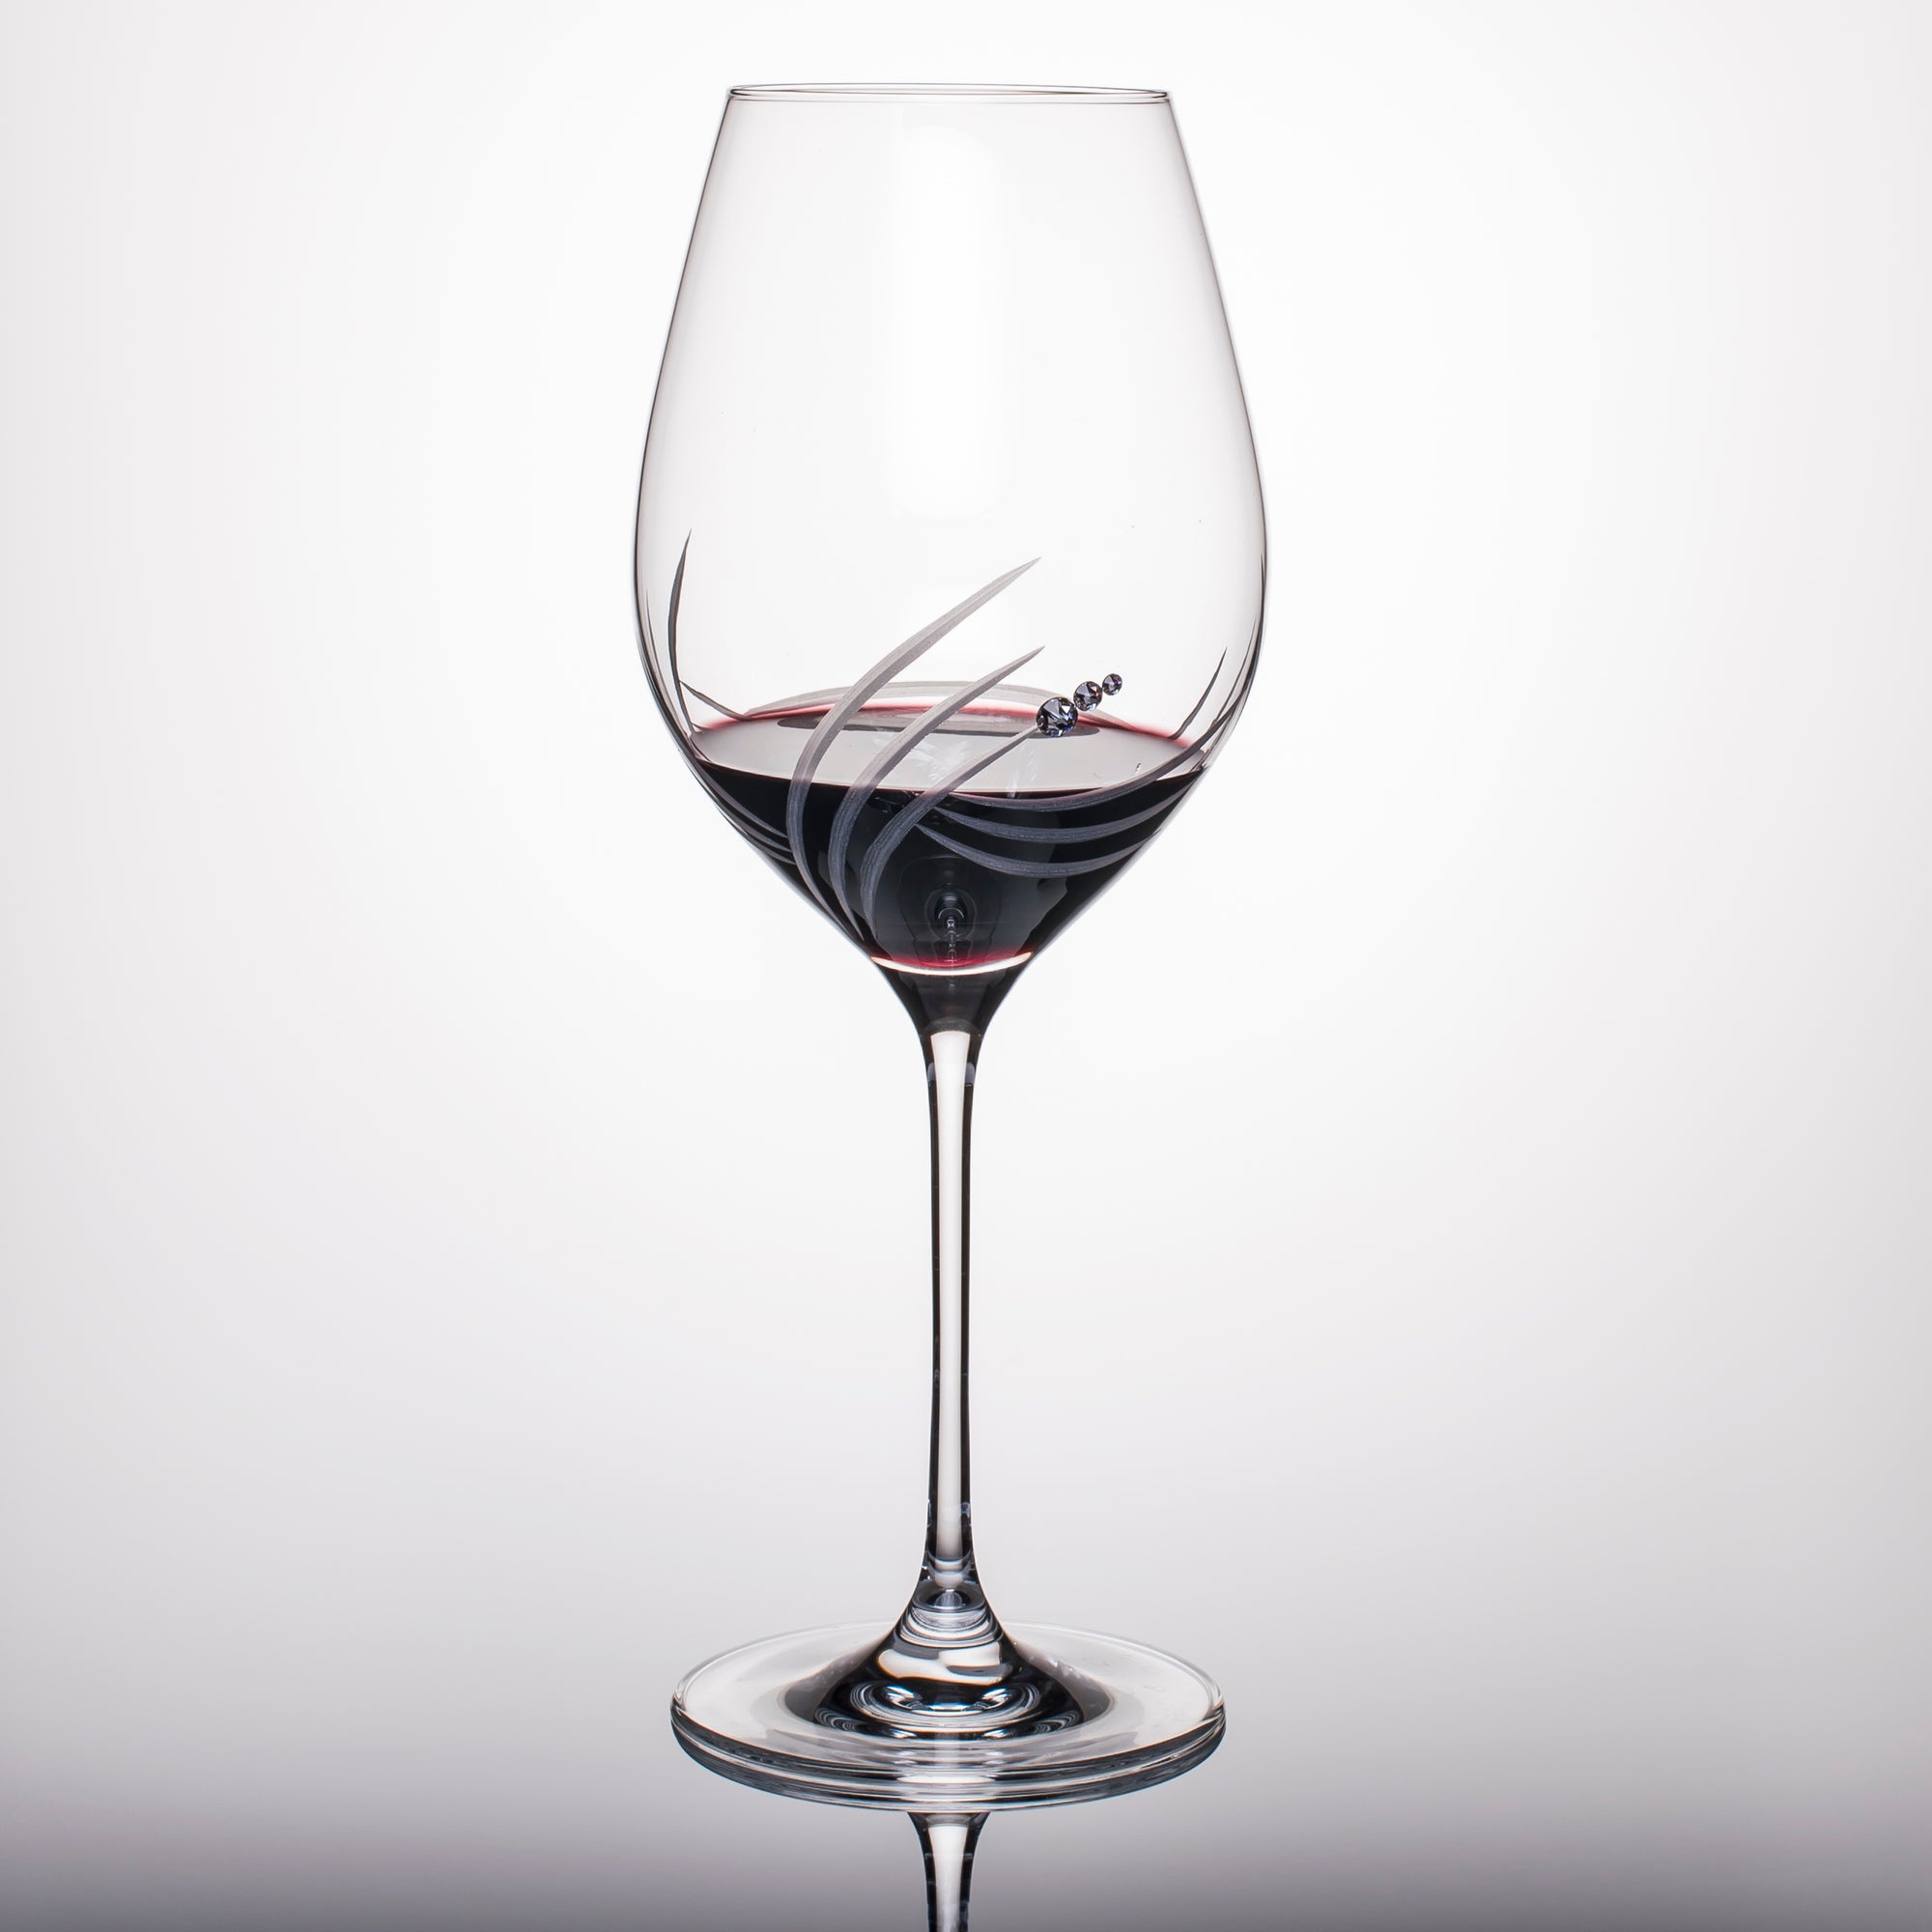 Breeze Bordeaux Red Wine Glasses - Set of 2 in gift box – Julianna Glass